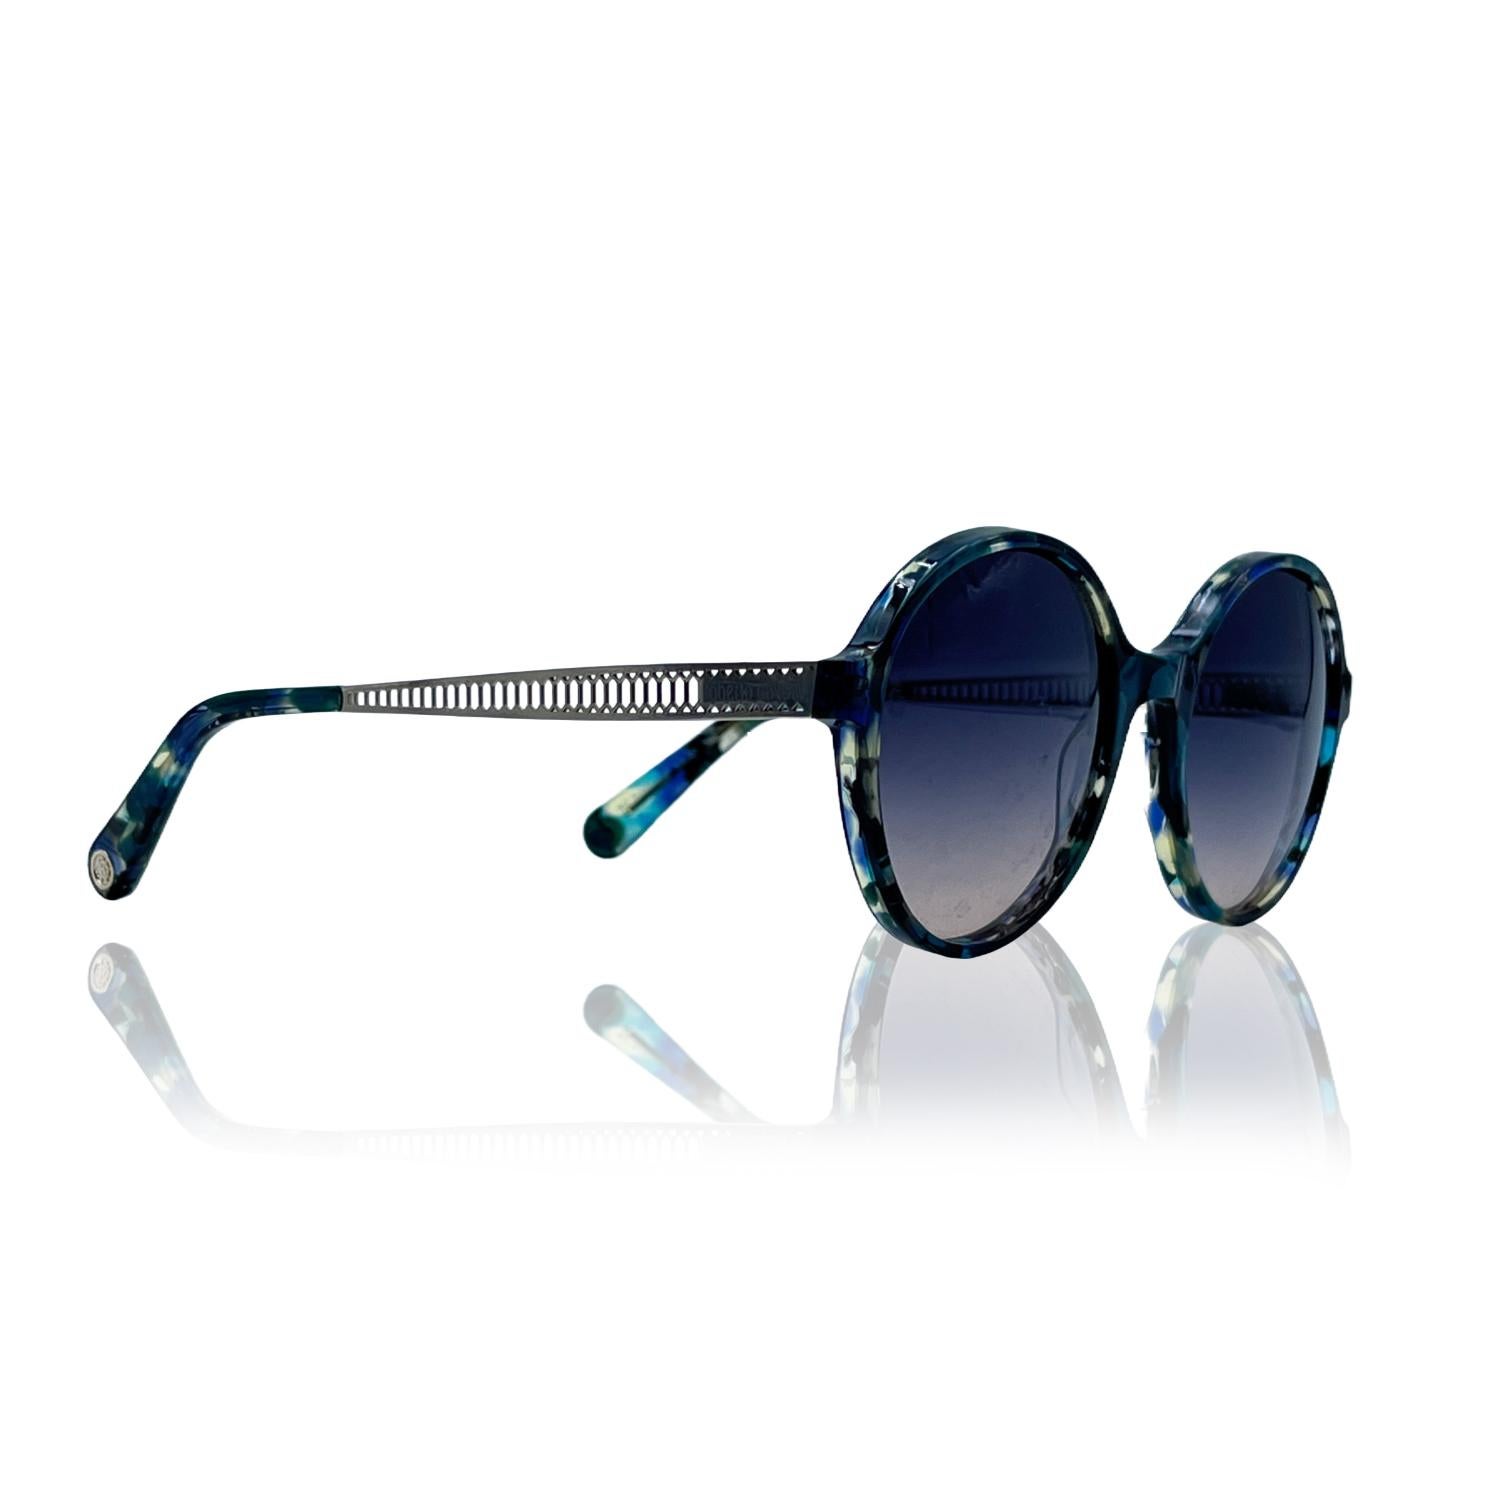 Roberto Cavalli Eyeglasses- Model: RC5088 - 055. Blue acetate frame with silver metal ear stems. Blue gradient lenses. Round design. Made in Italy.


Details

MATERIAL: Acetate

COLOR: Blue

MODEL: RC5088

GENDER: Women

COUNTRY OF MANUFACTURE: